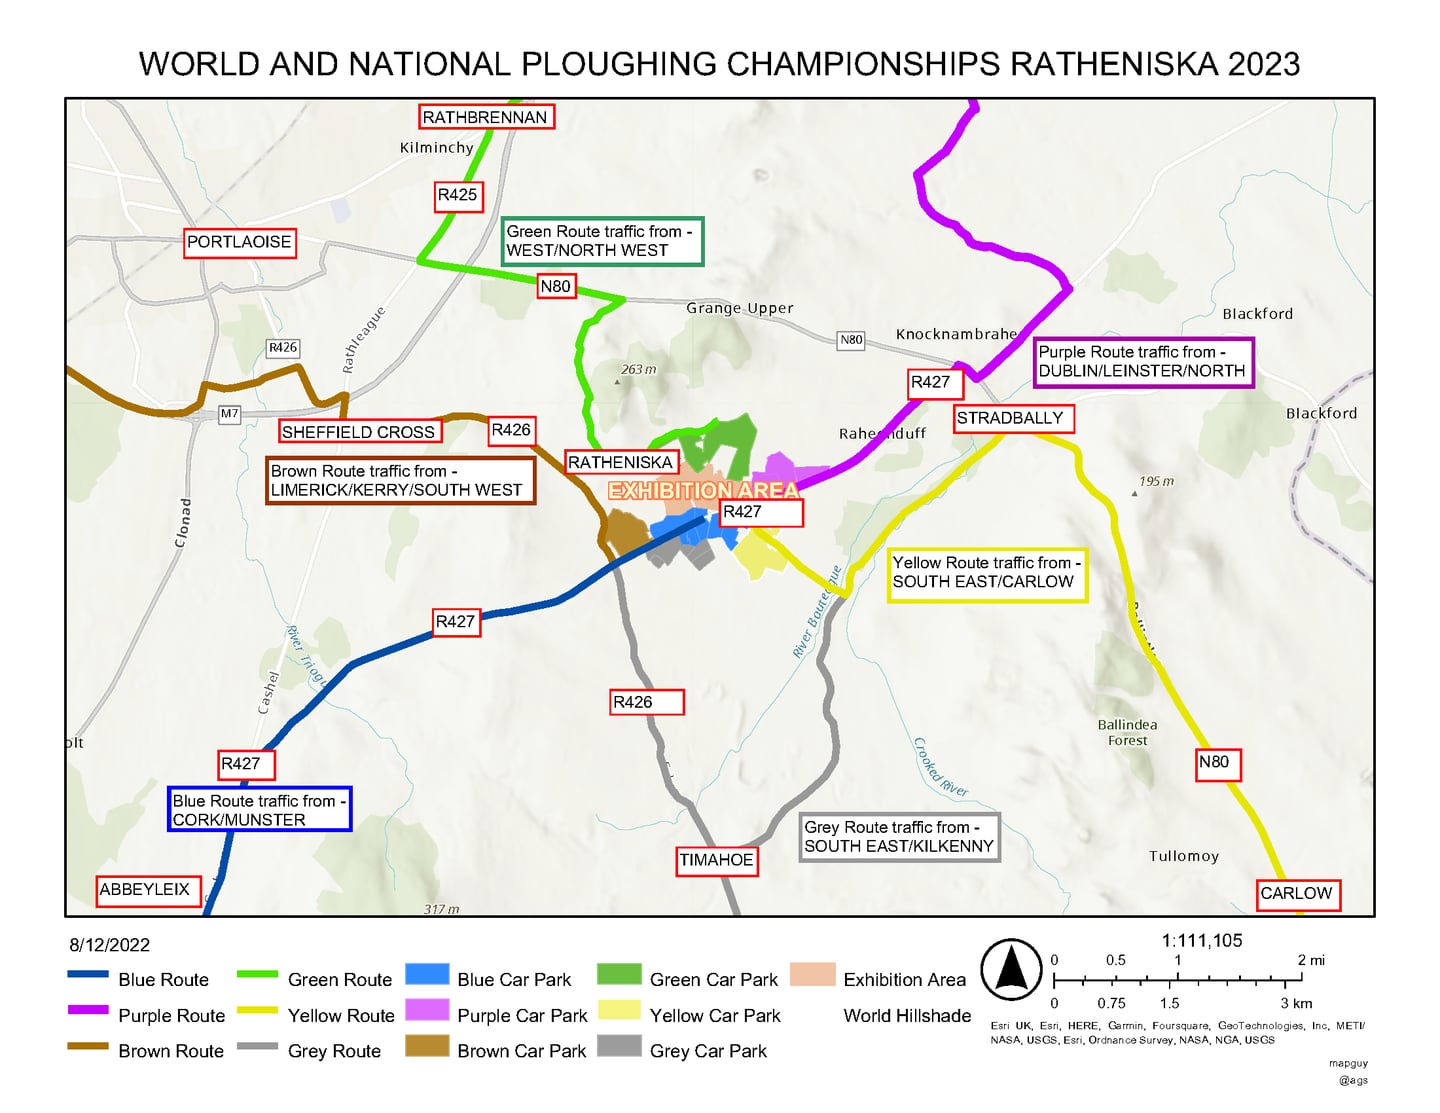 2023 National and World Ploughing Championships